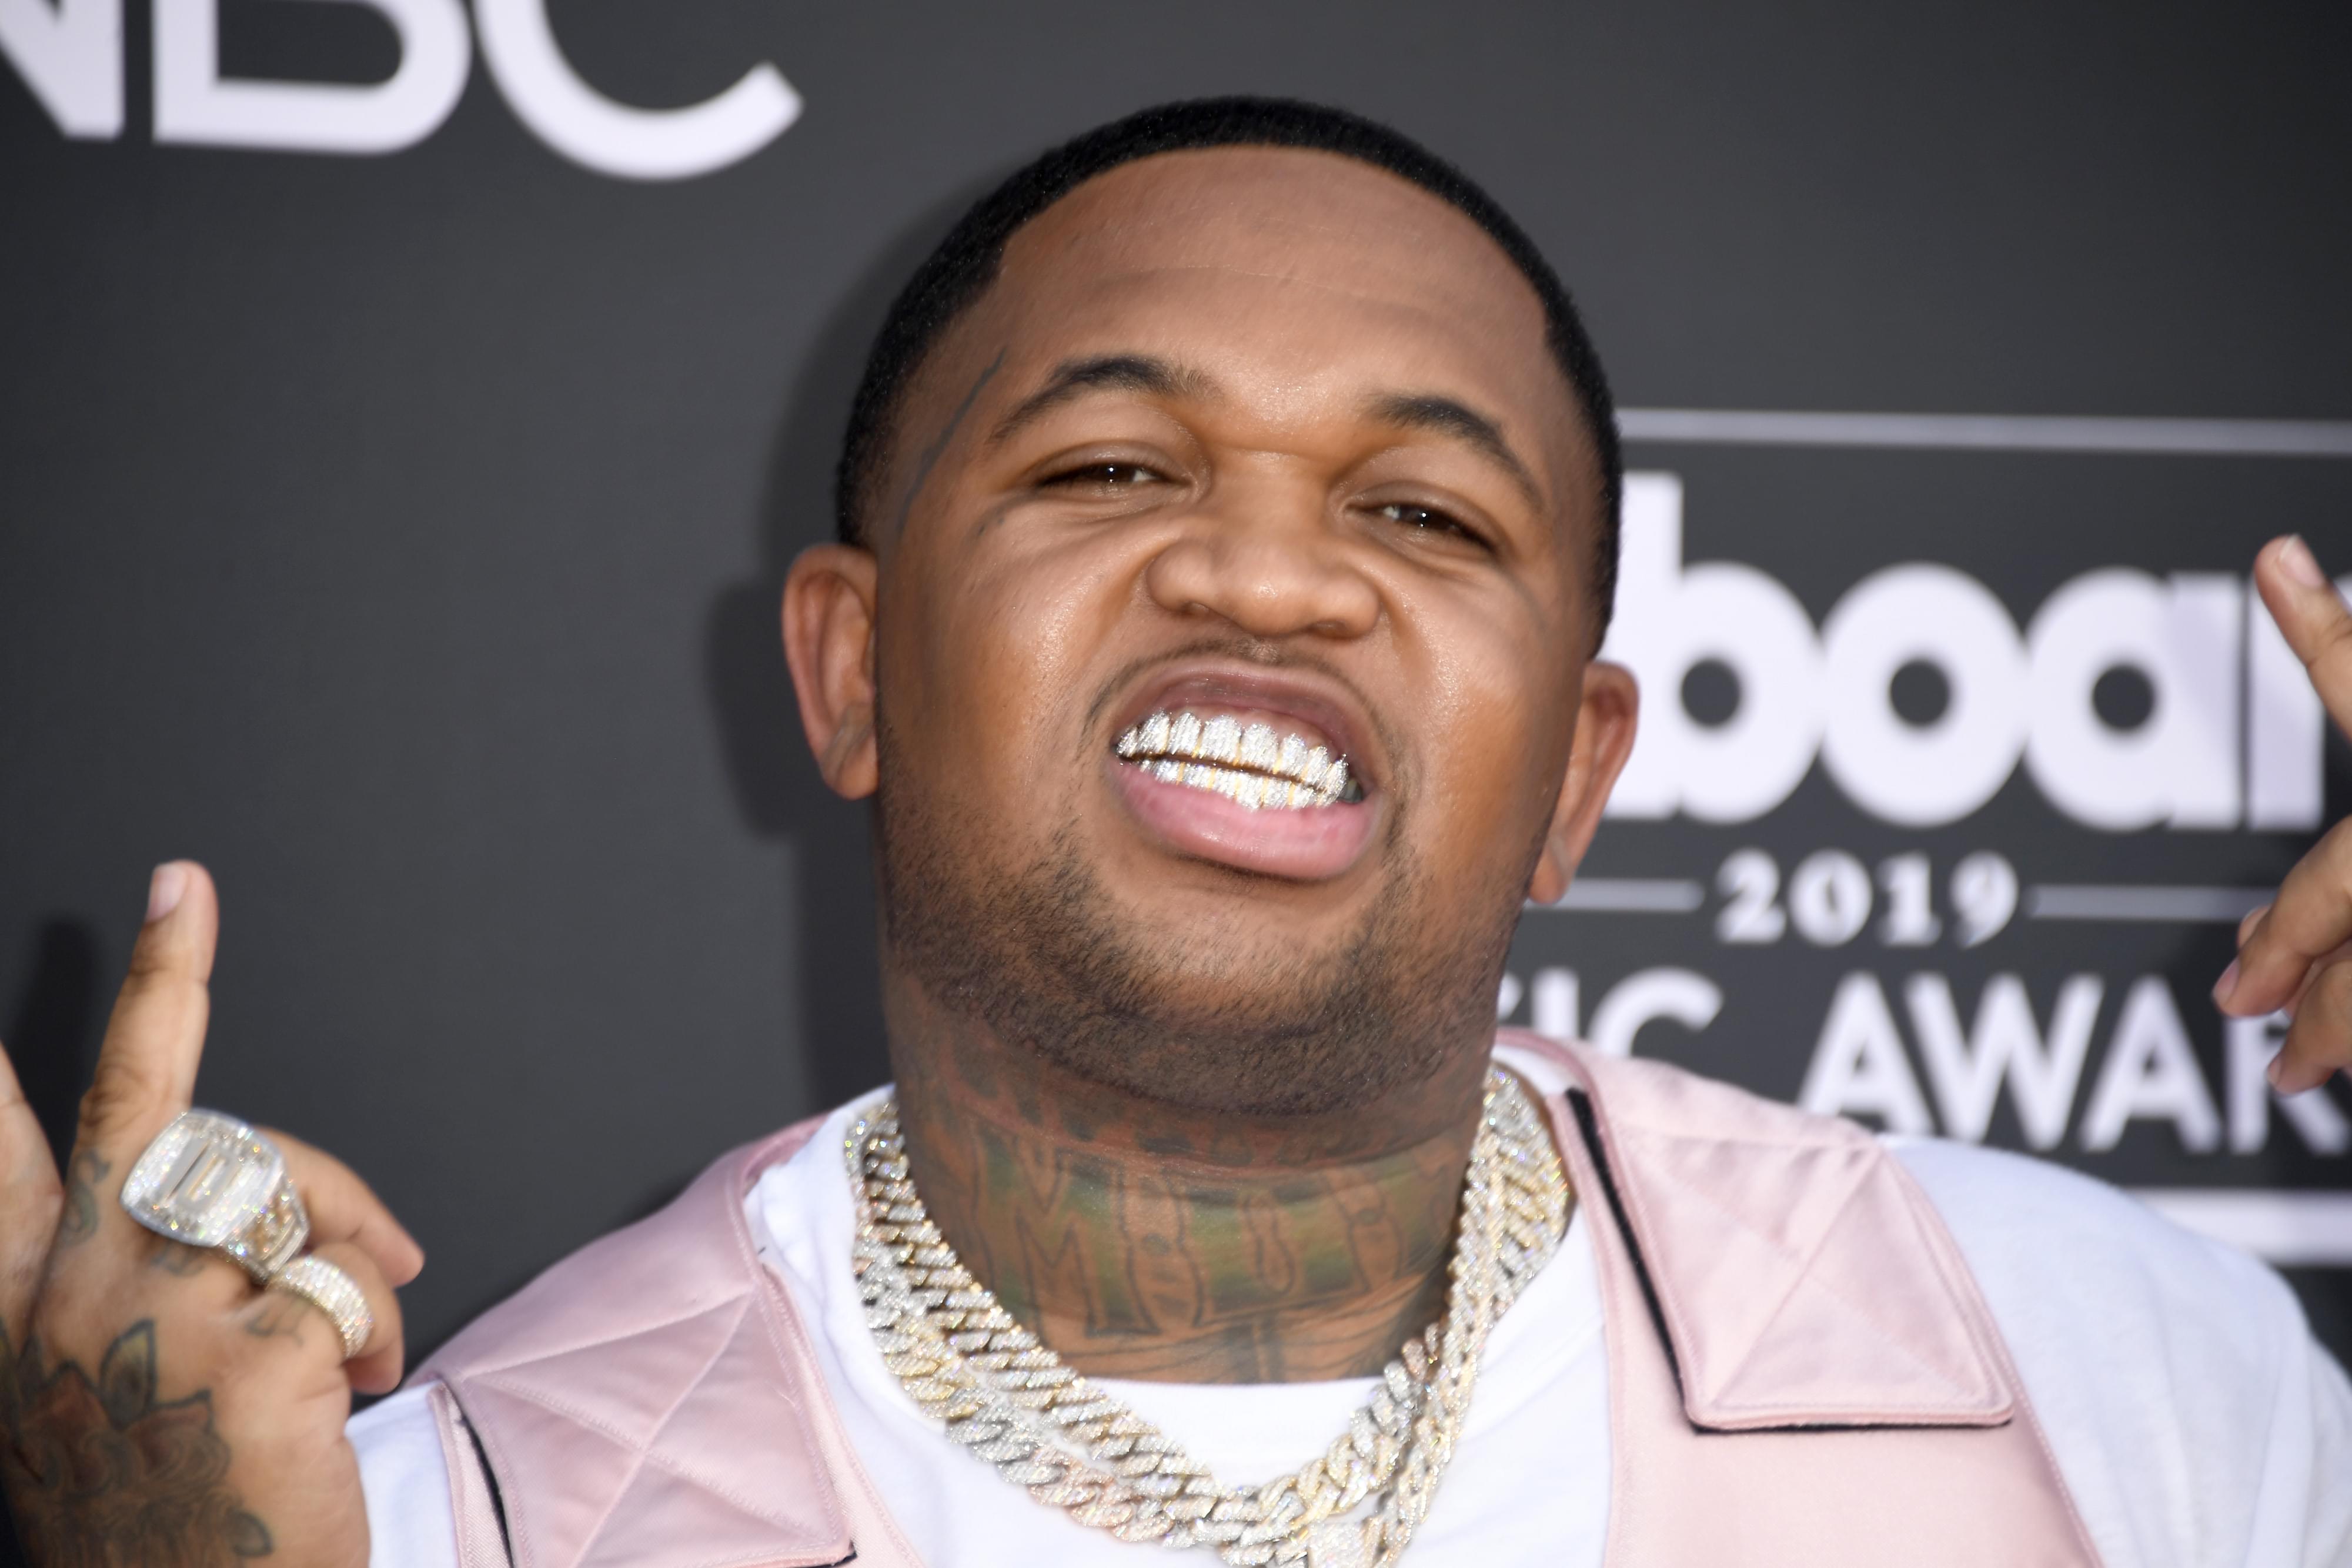 DJ Mustard Buys A “Push” Gift For His Fiancé